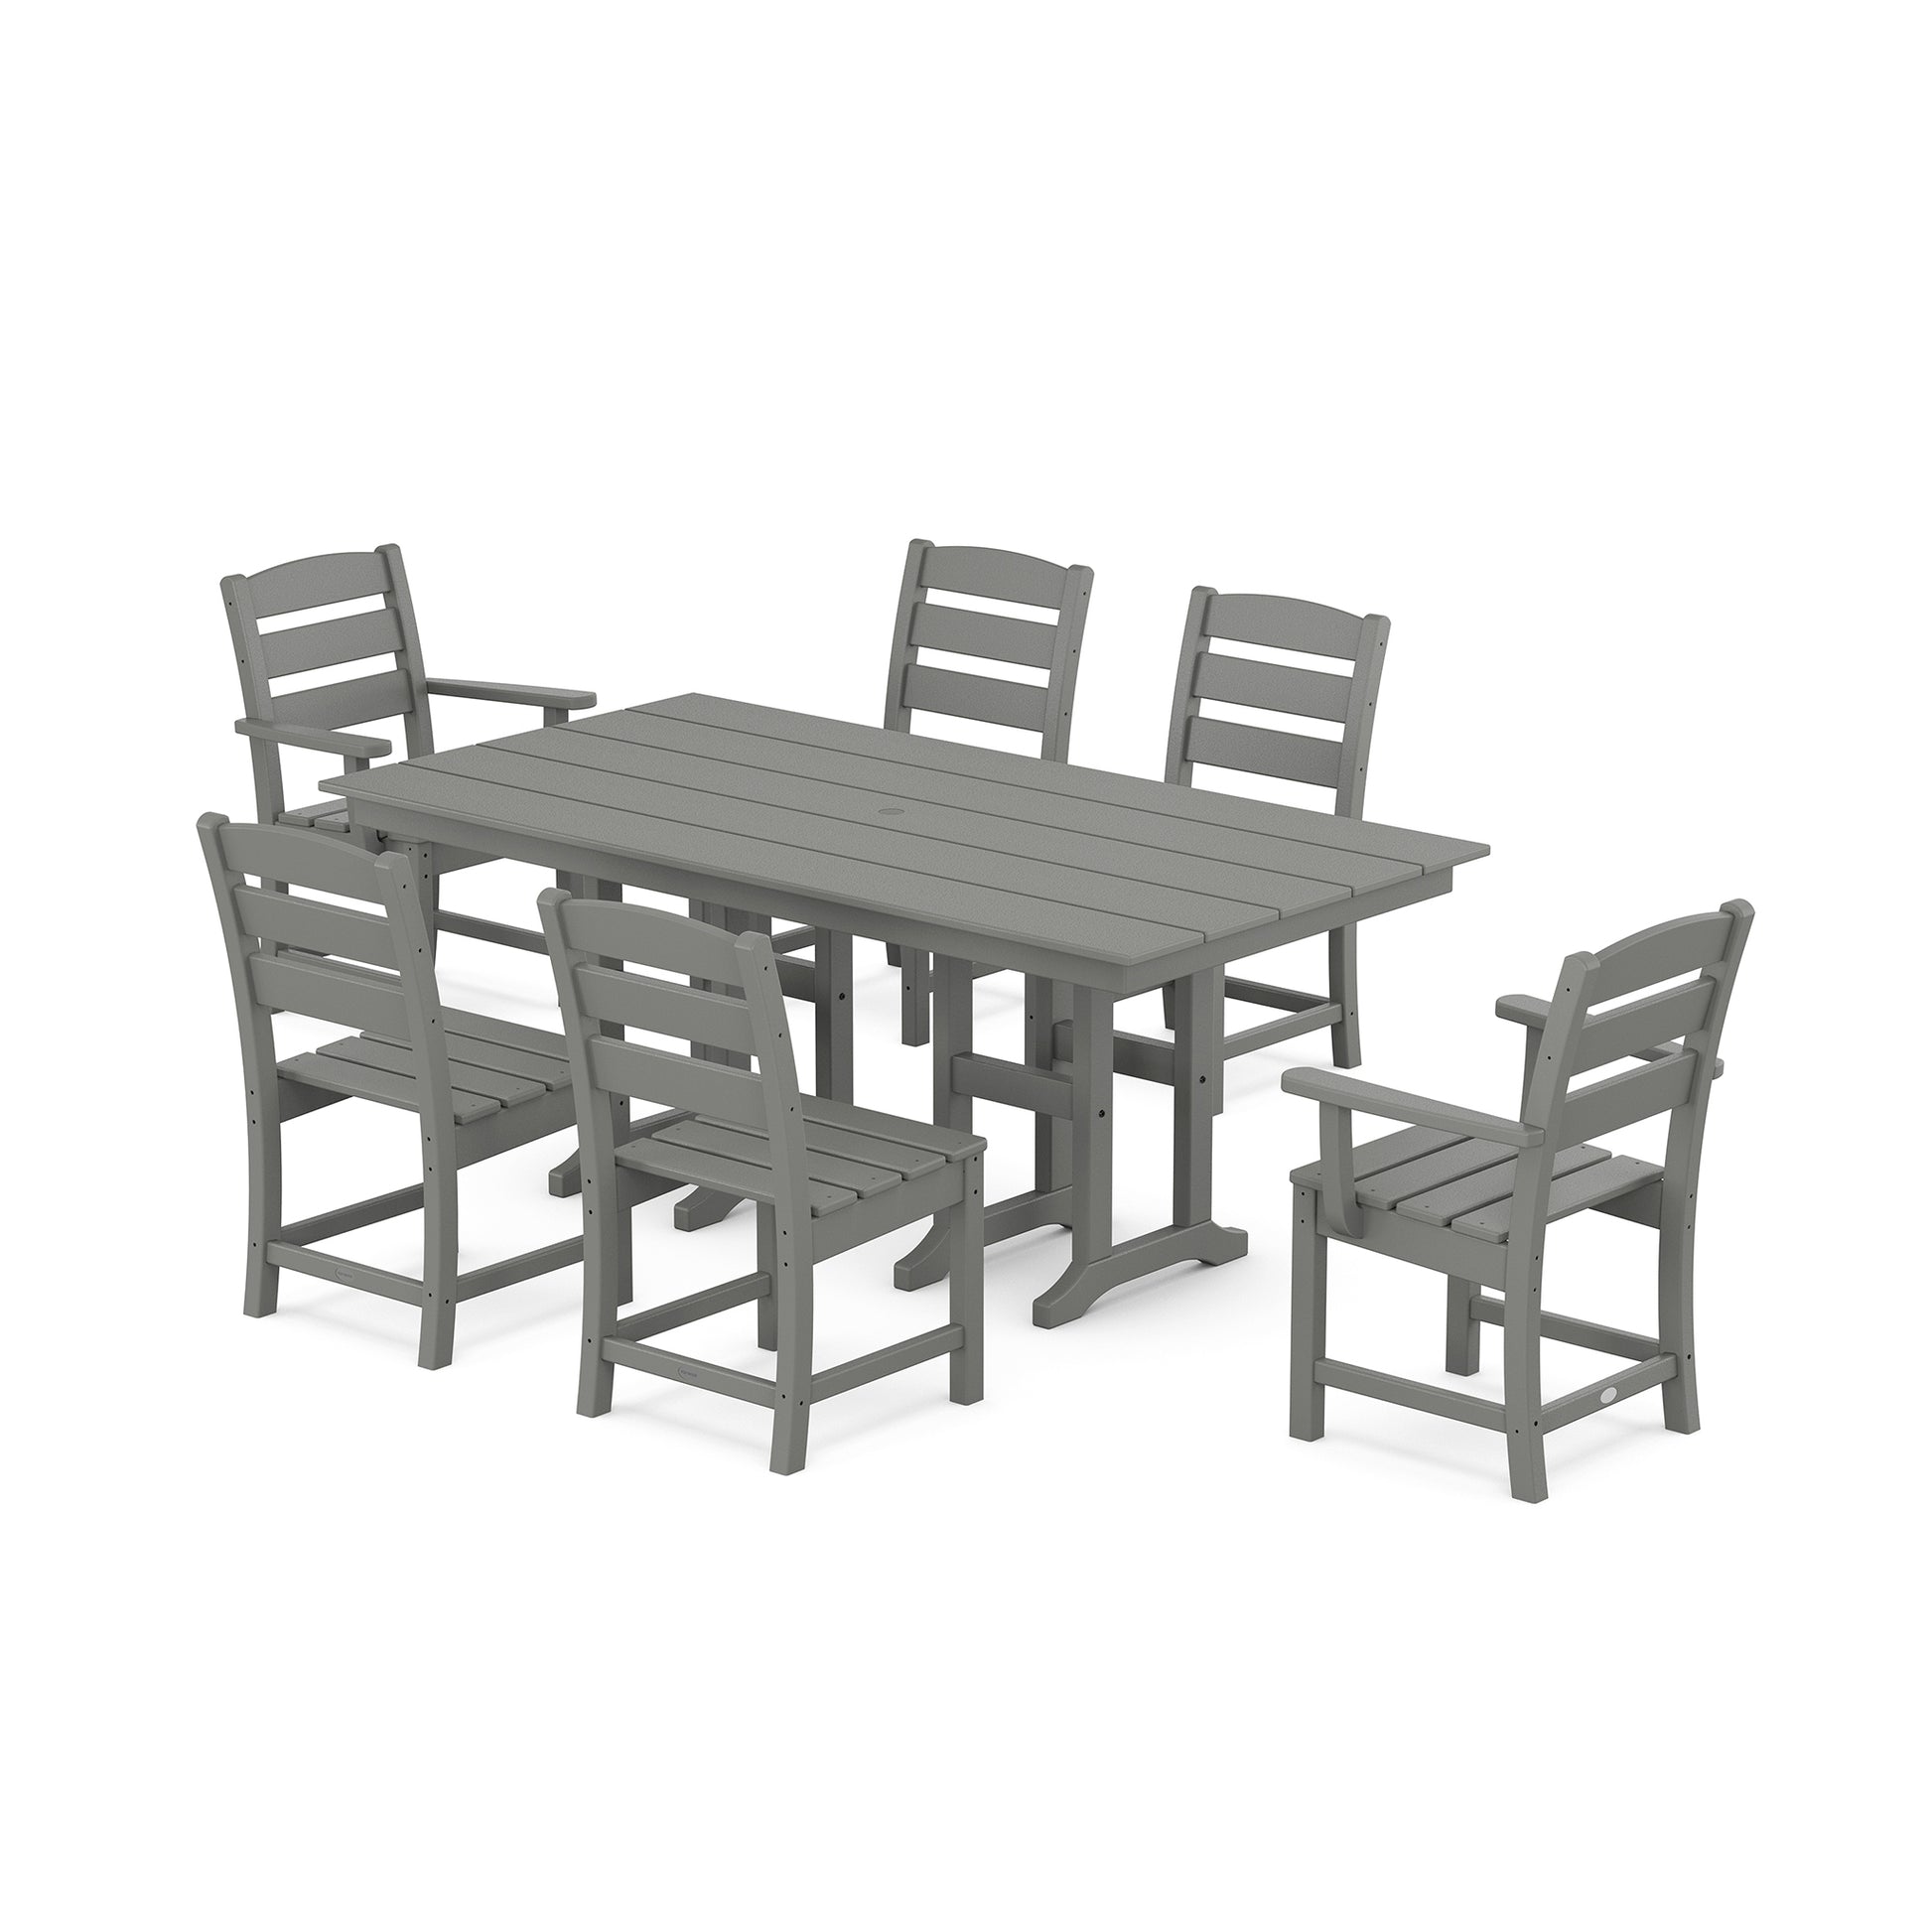 A modern outdoor dining set featuring a rectangular table and six chairs, all made of gray weather-resistant synthetic material, arranged on a plain light background. The set is the POLYWOOD Lakeside 7-Piece Farmhouse Dining Set.